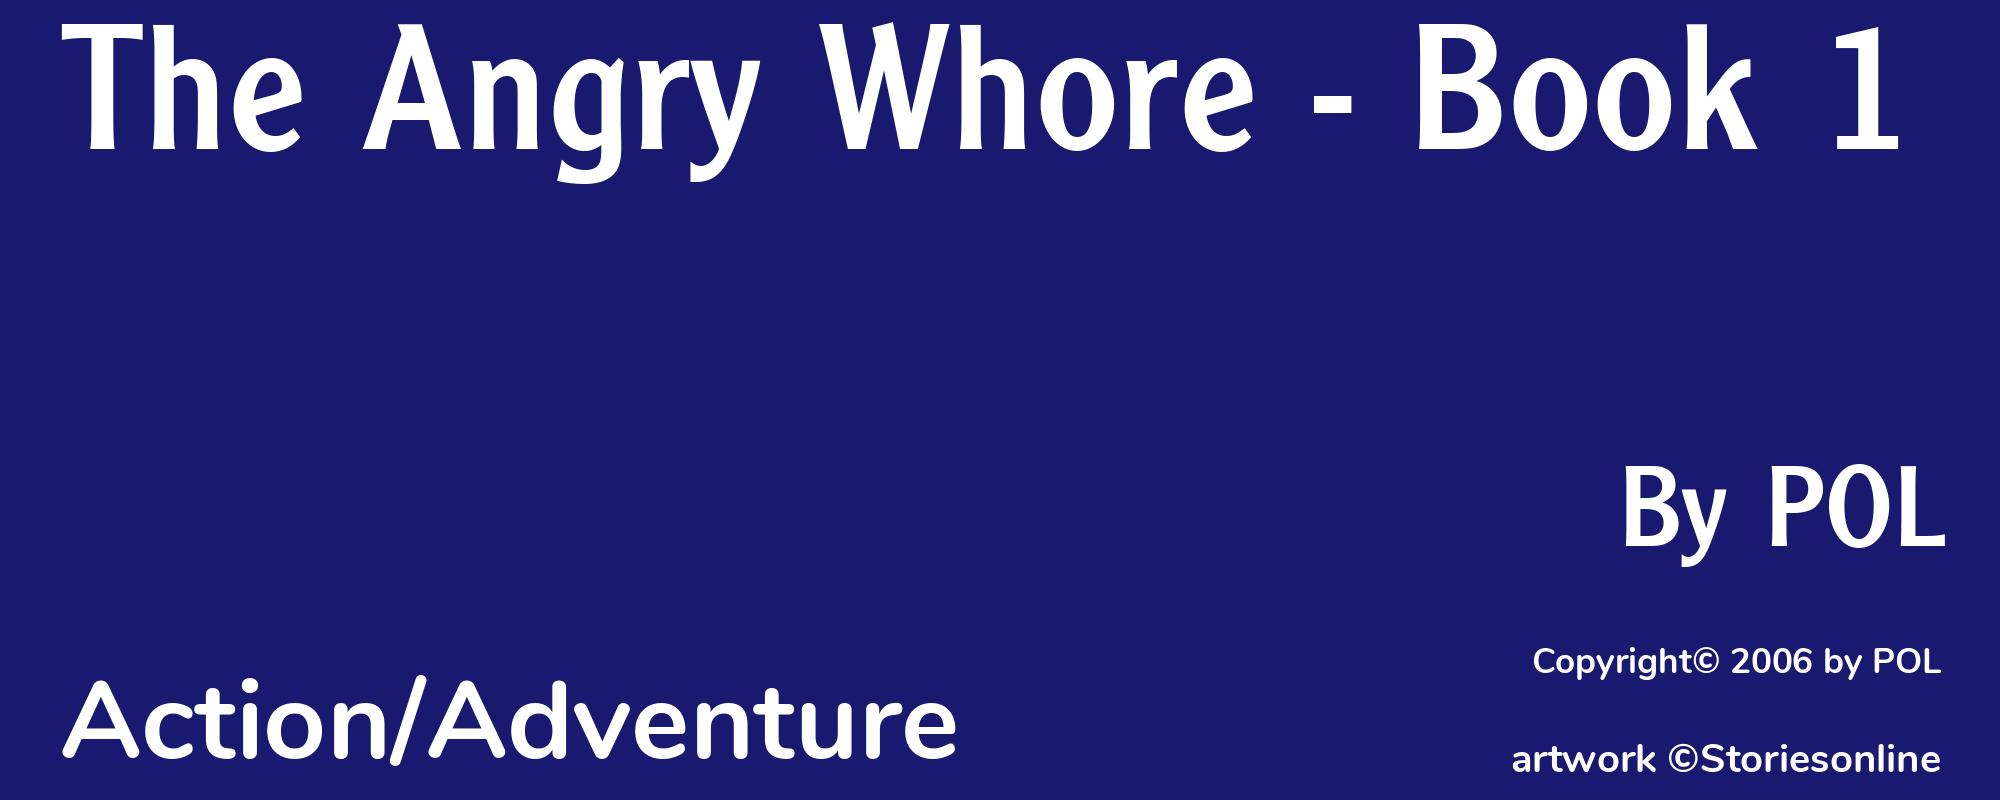 The Angry Whore - Book 1 - Cover